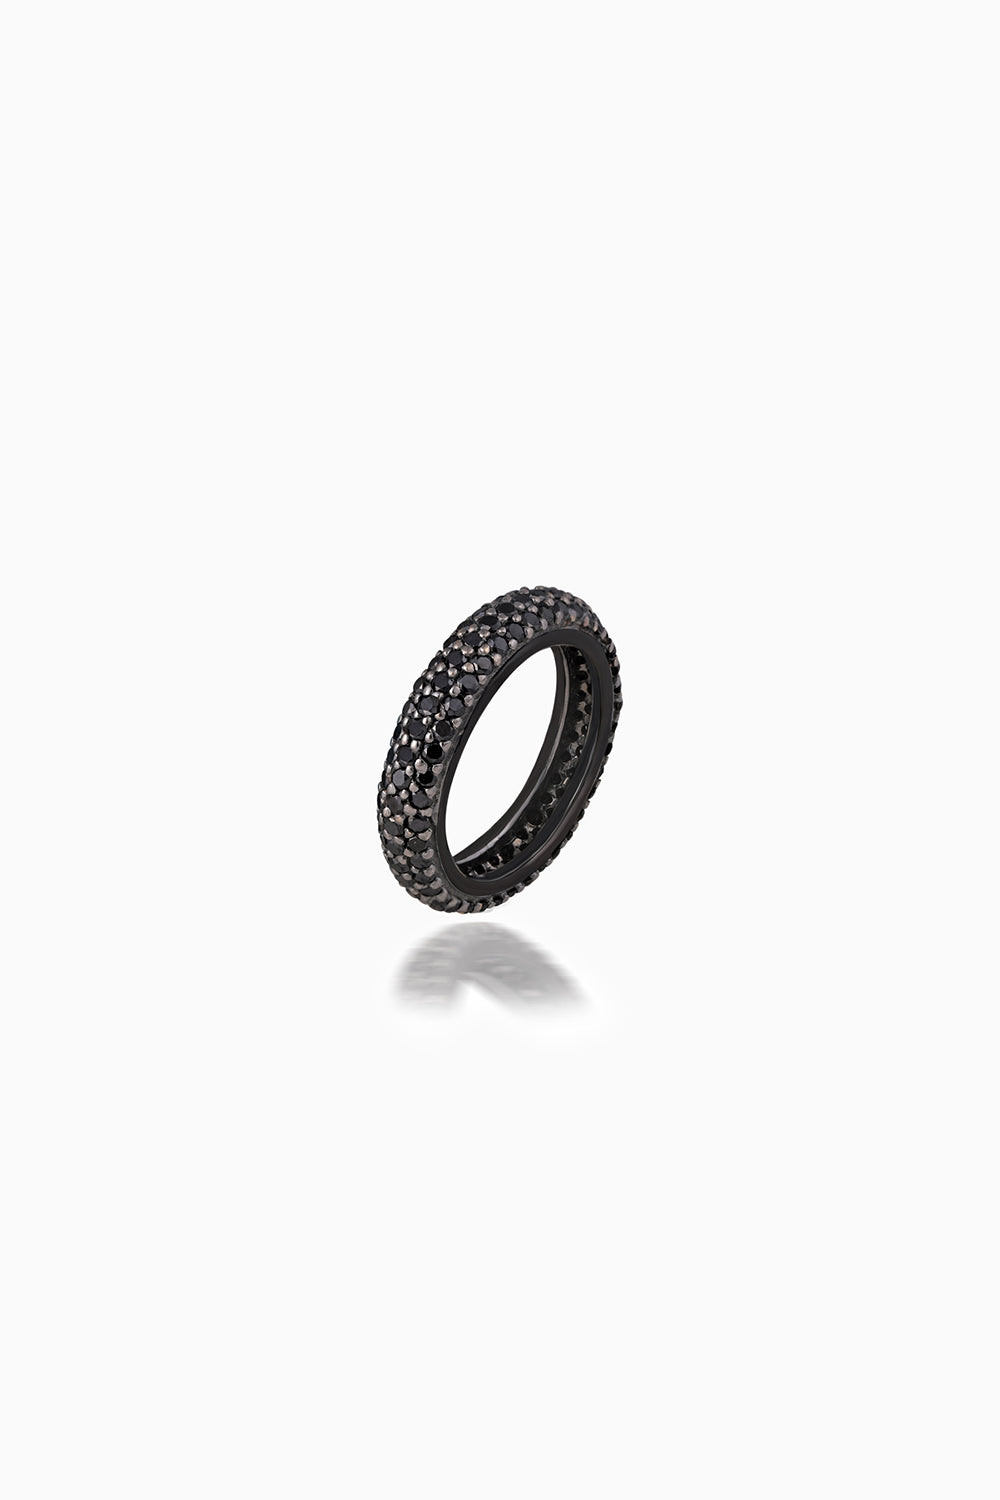 Classic Black 18KT Gold Diamond Stackable Ring